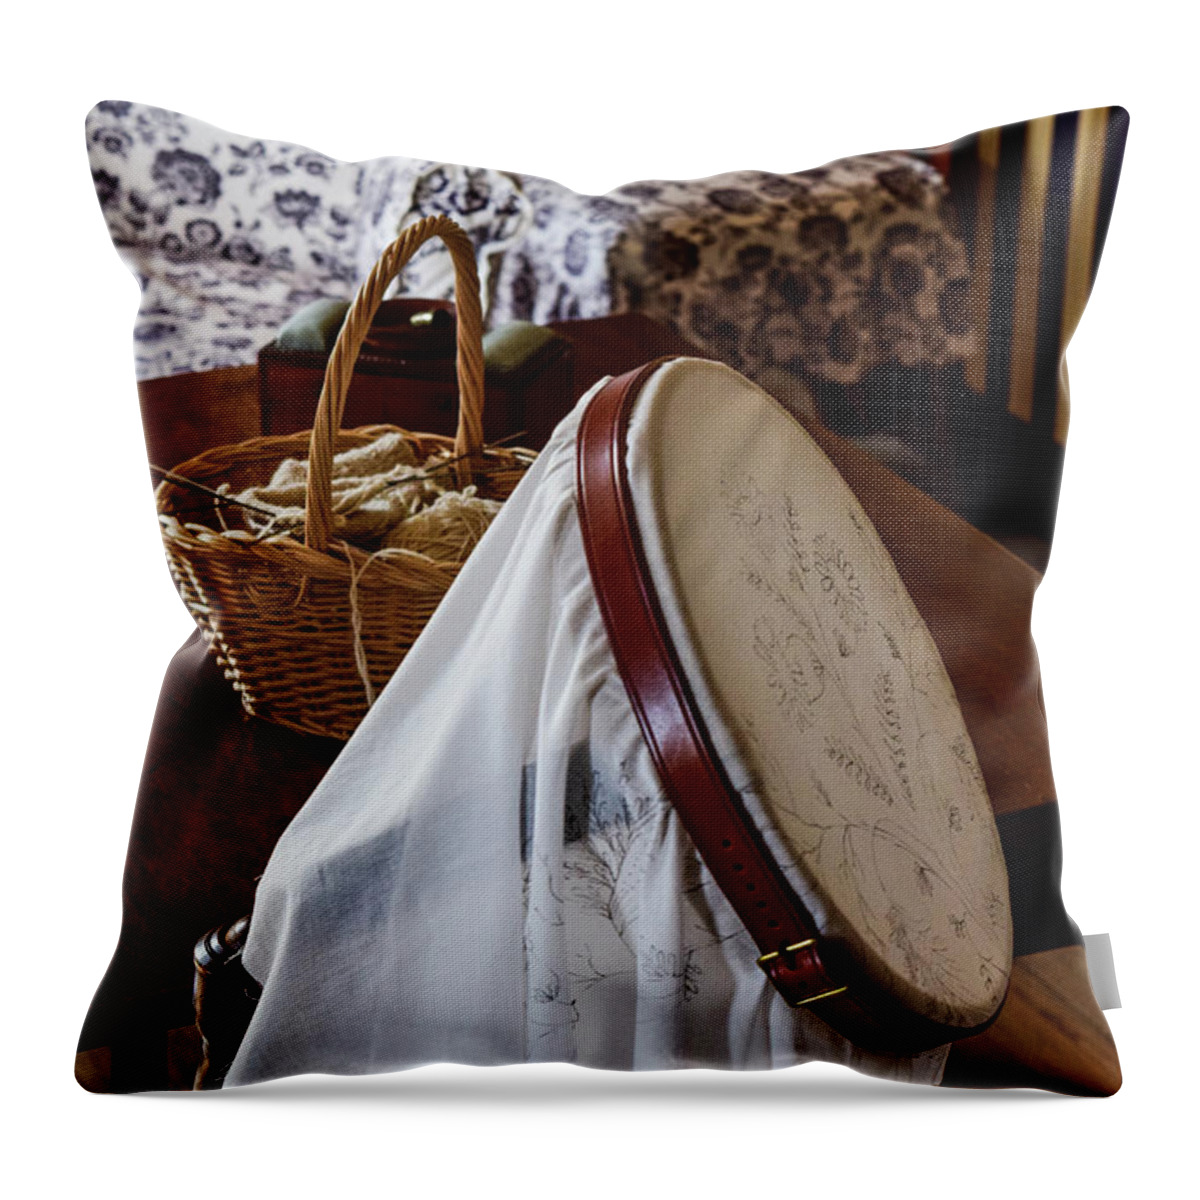 Needlework Throw Pillow featuring the photograph Colonial Needlework by Nicole Lloyd